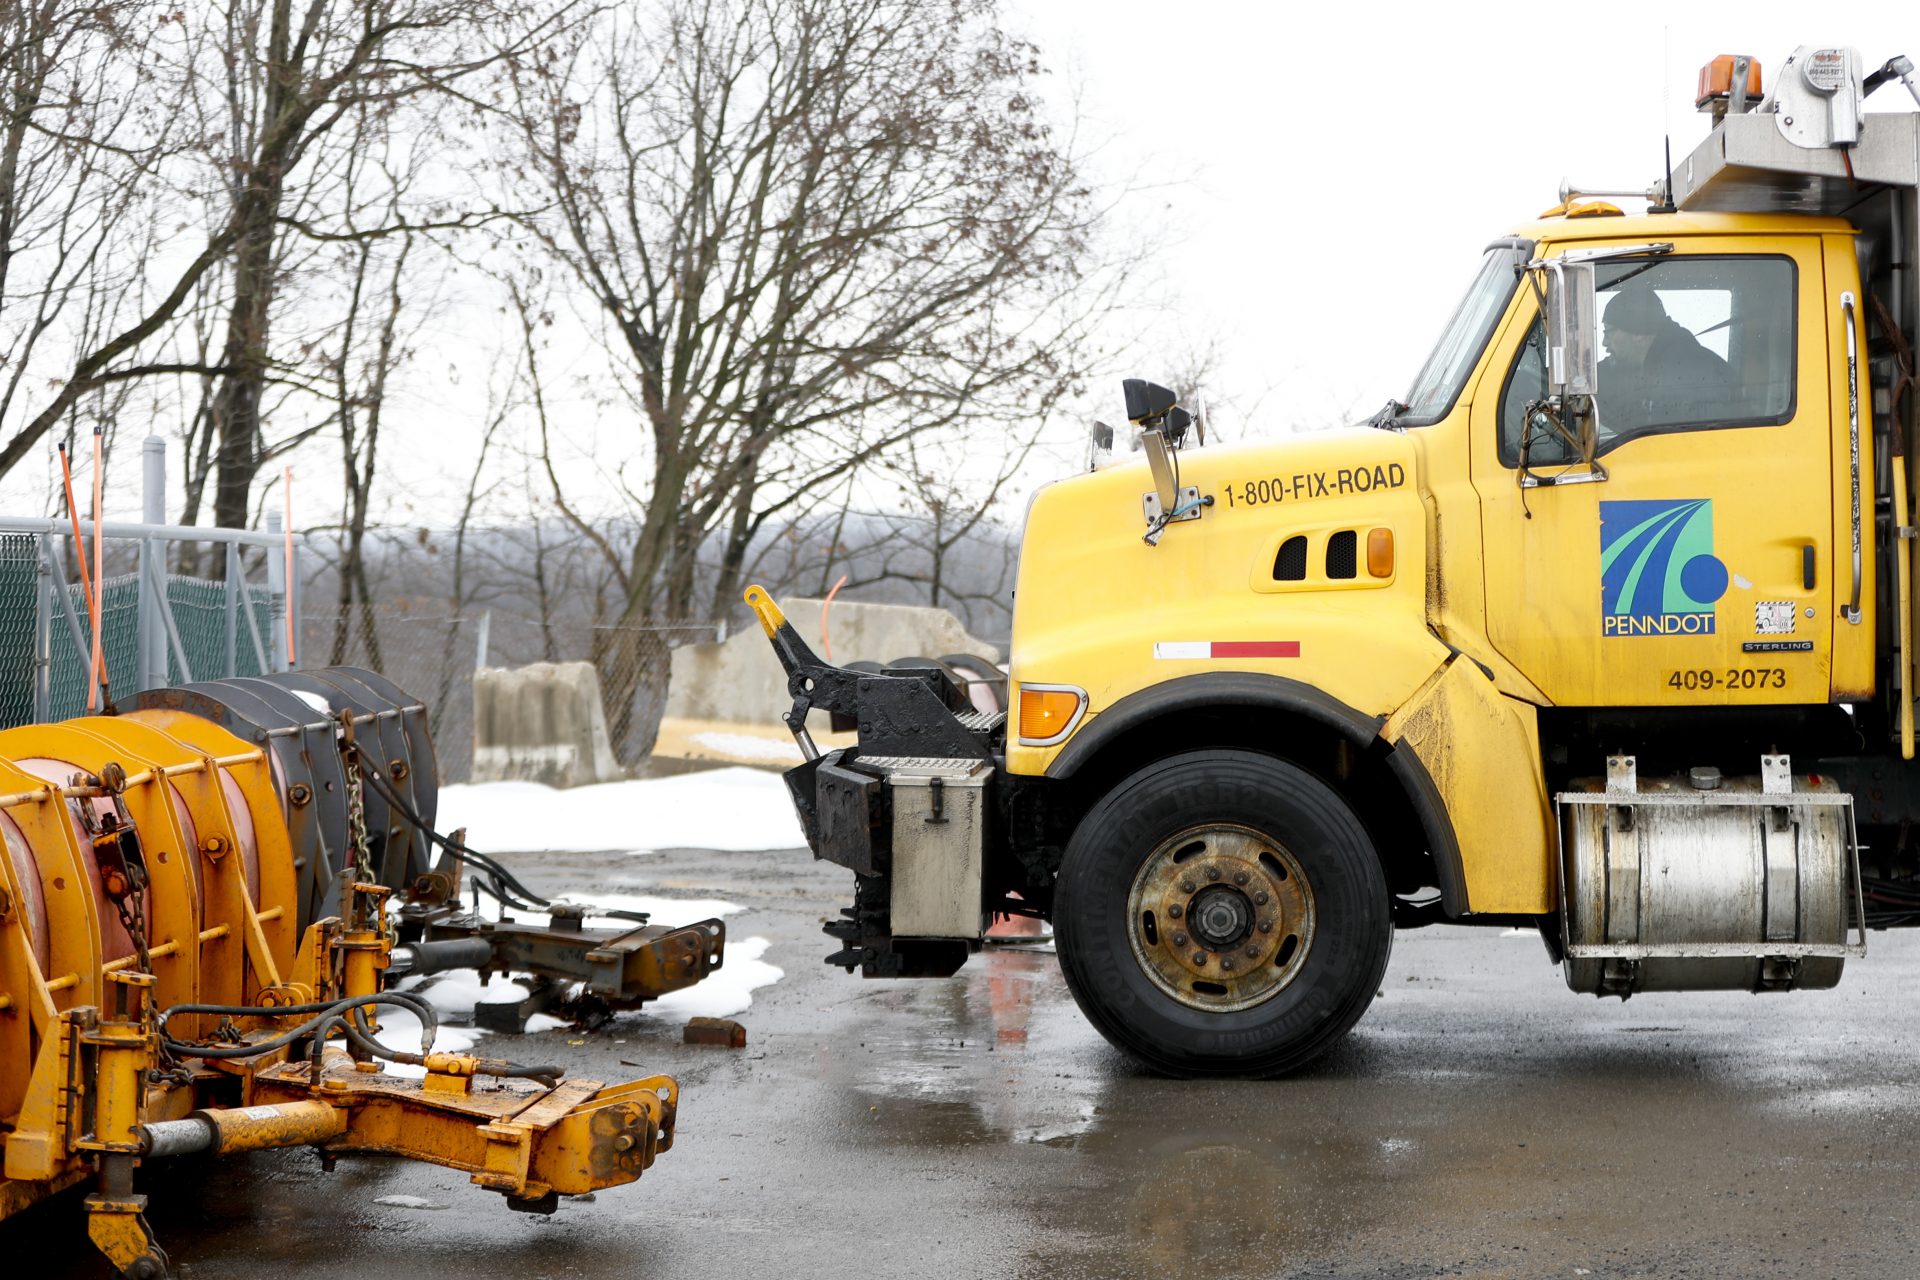 A Pennsylvania Department of Transportation road treatment truck pulls in to attach a plow at a storage facility in Franklin Park, Pa. on Friday, Jan. 18, 2019.